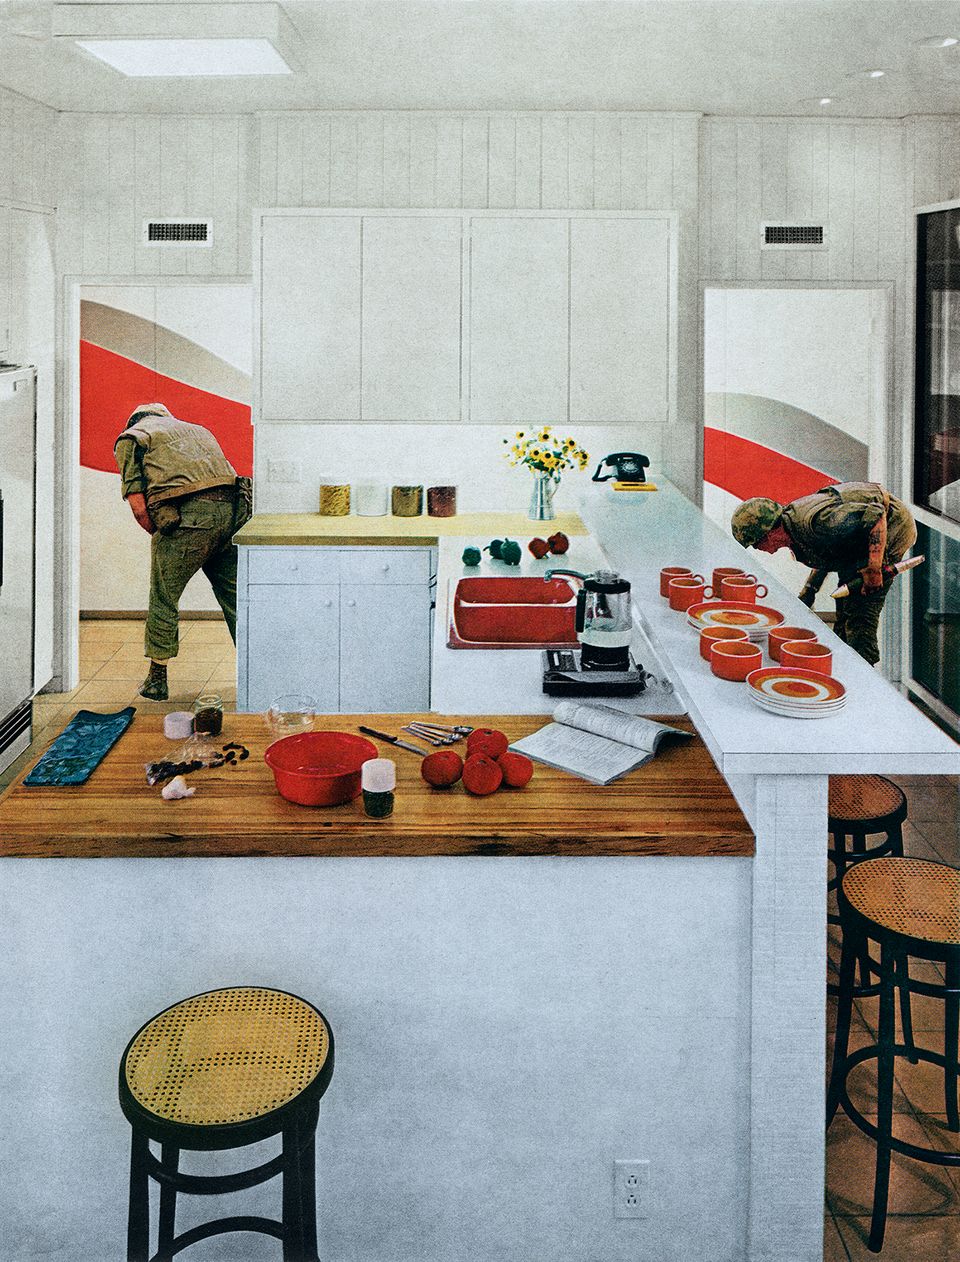 An artwork of a kitchen with red utensils and a red line on the hallway wall with a soldier in the hallway.